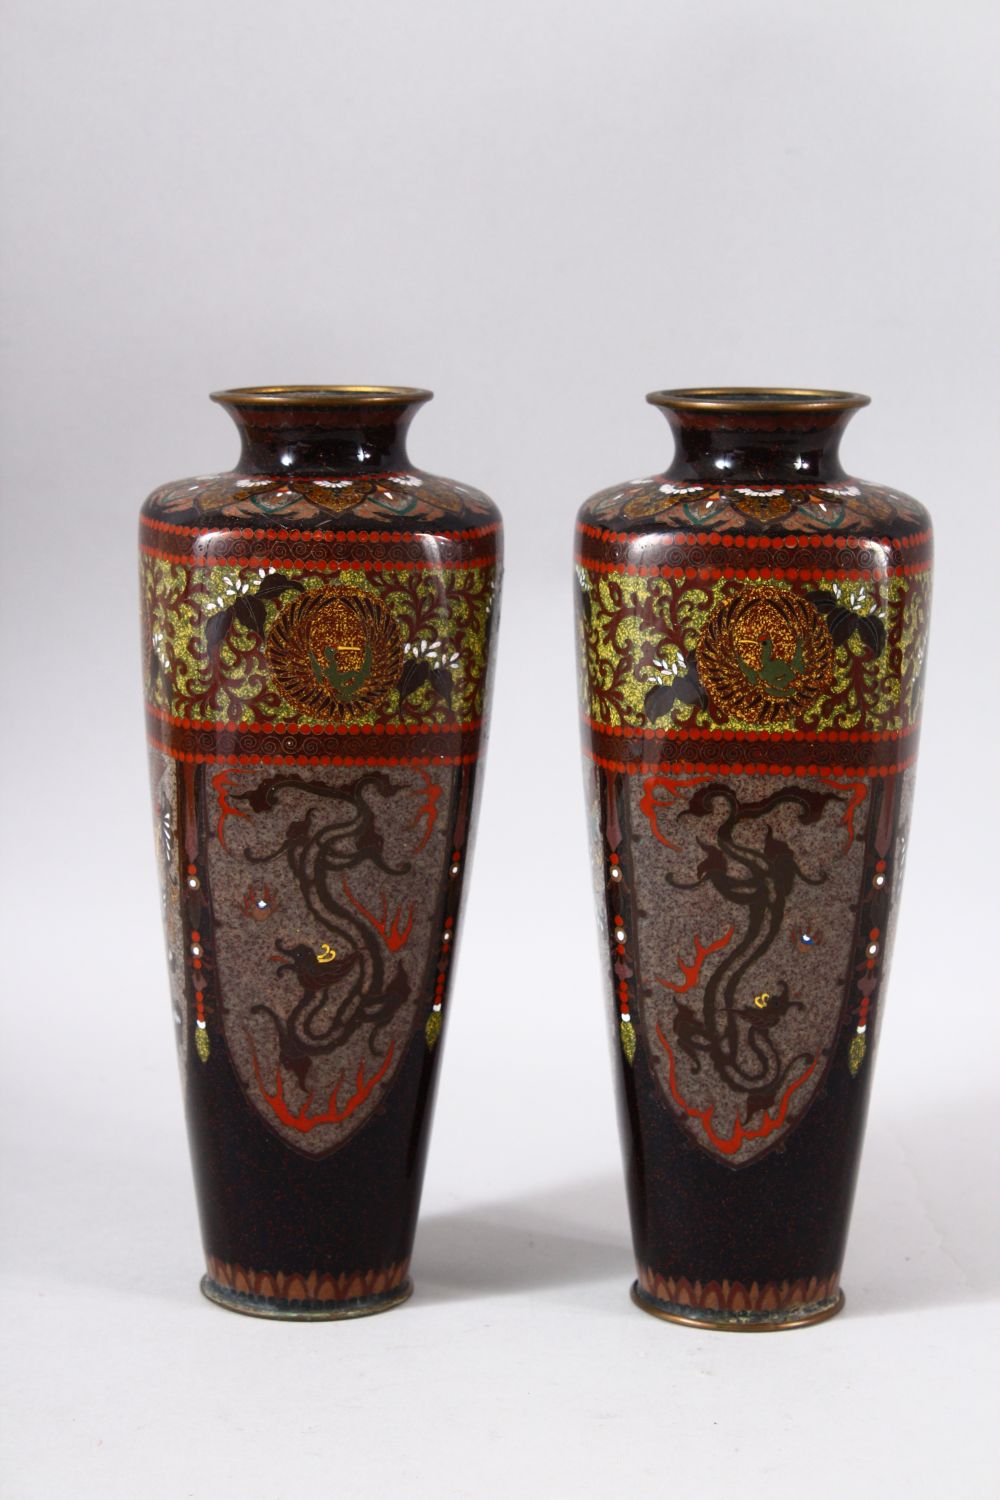 A PAIR OF JAPANESE CLOISONNE VASES, with panels of phoenix and dragons, both 24.5cm high. - Image 2 of 6